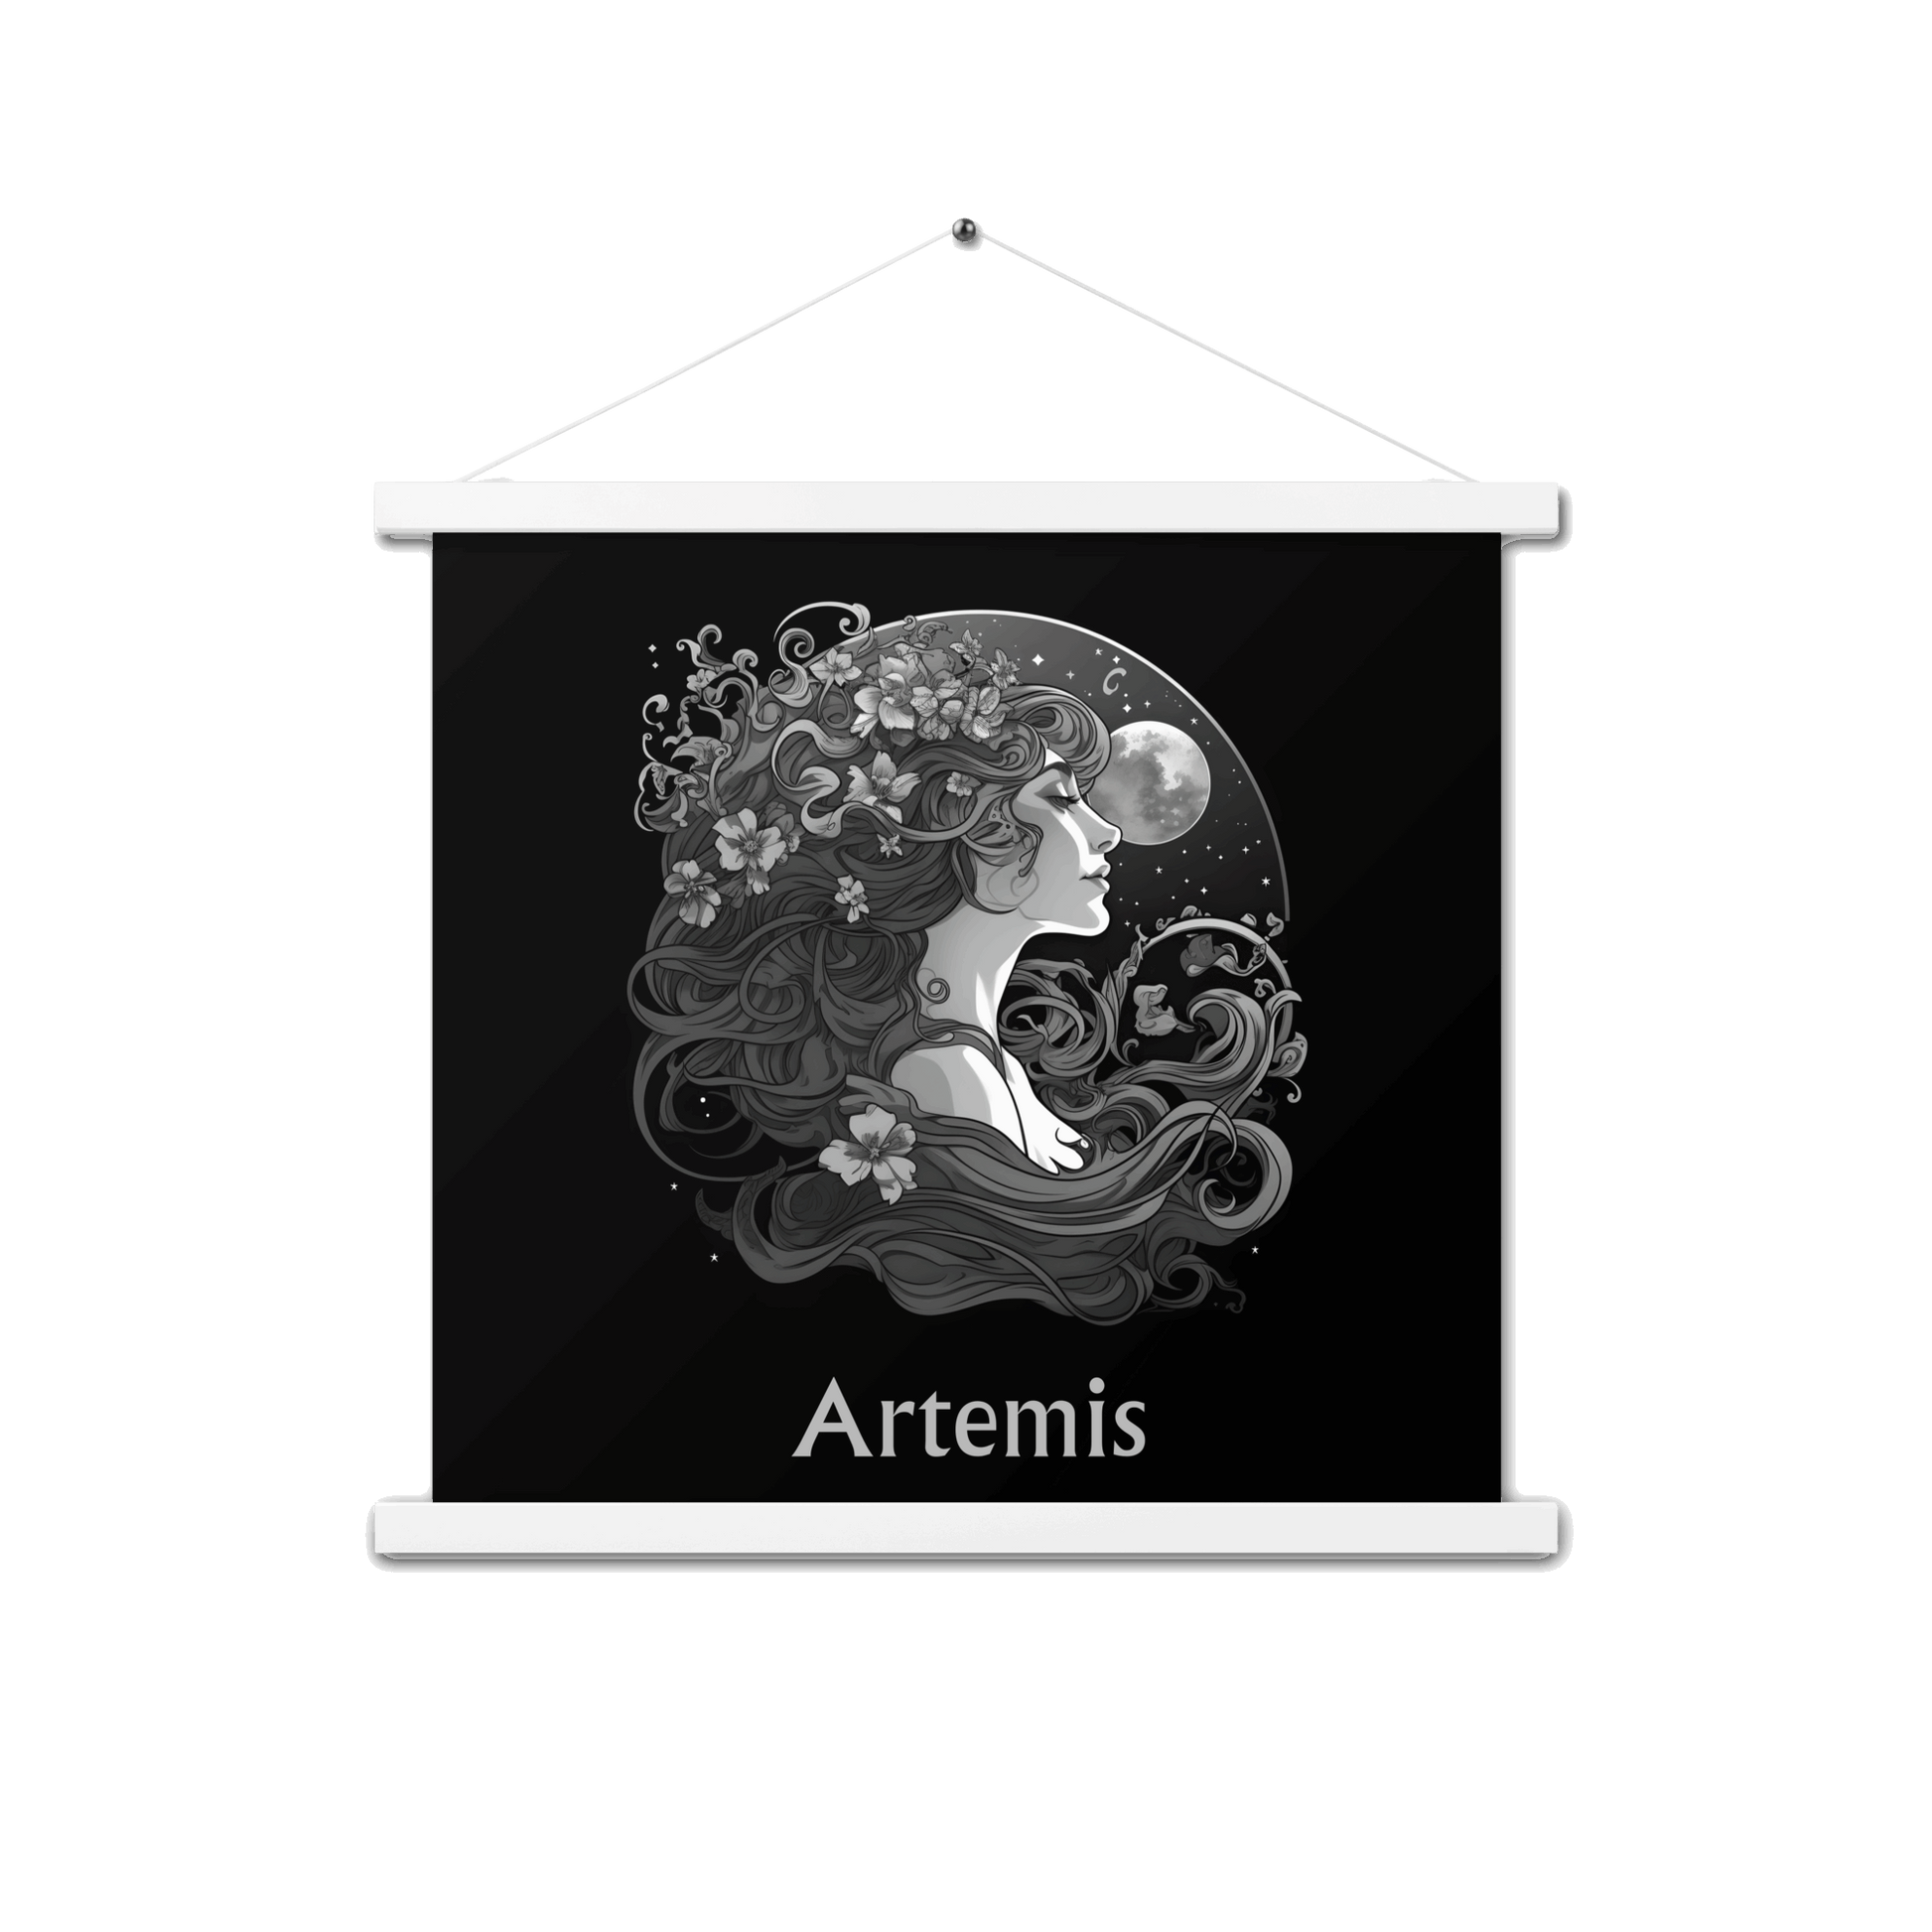 Artemis' Perception - Black and White Hanging Wall Art High Quality Matte Poster DrawDadDraw